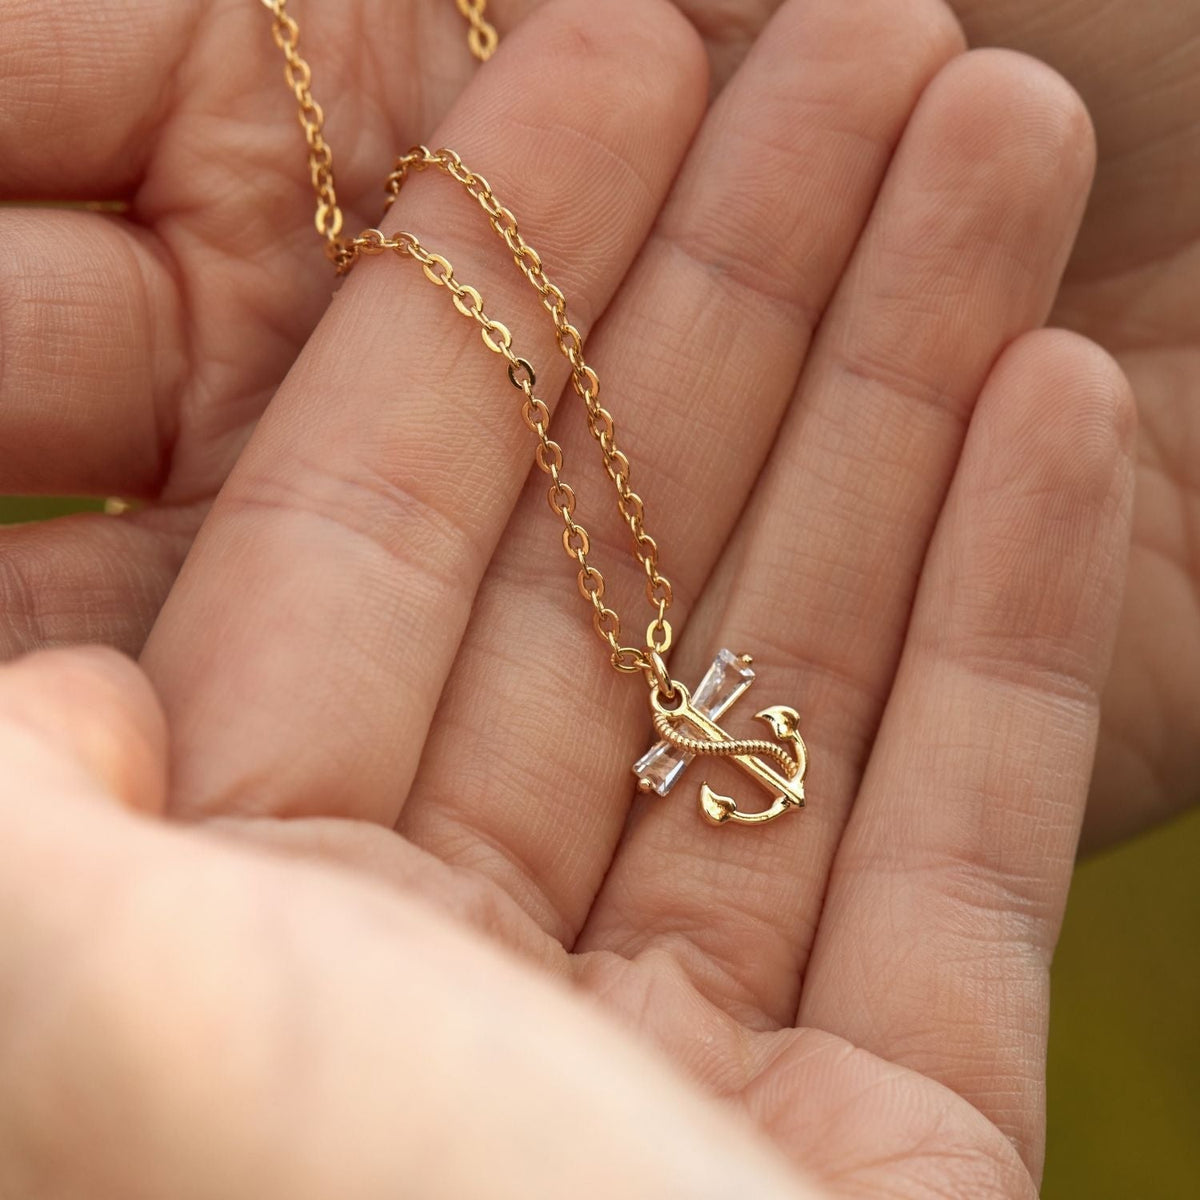 To My Beautiful Bonus Daughter | Still Miraculously My Own | Anchor Necklace